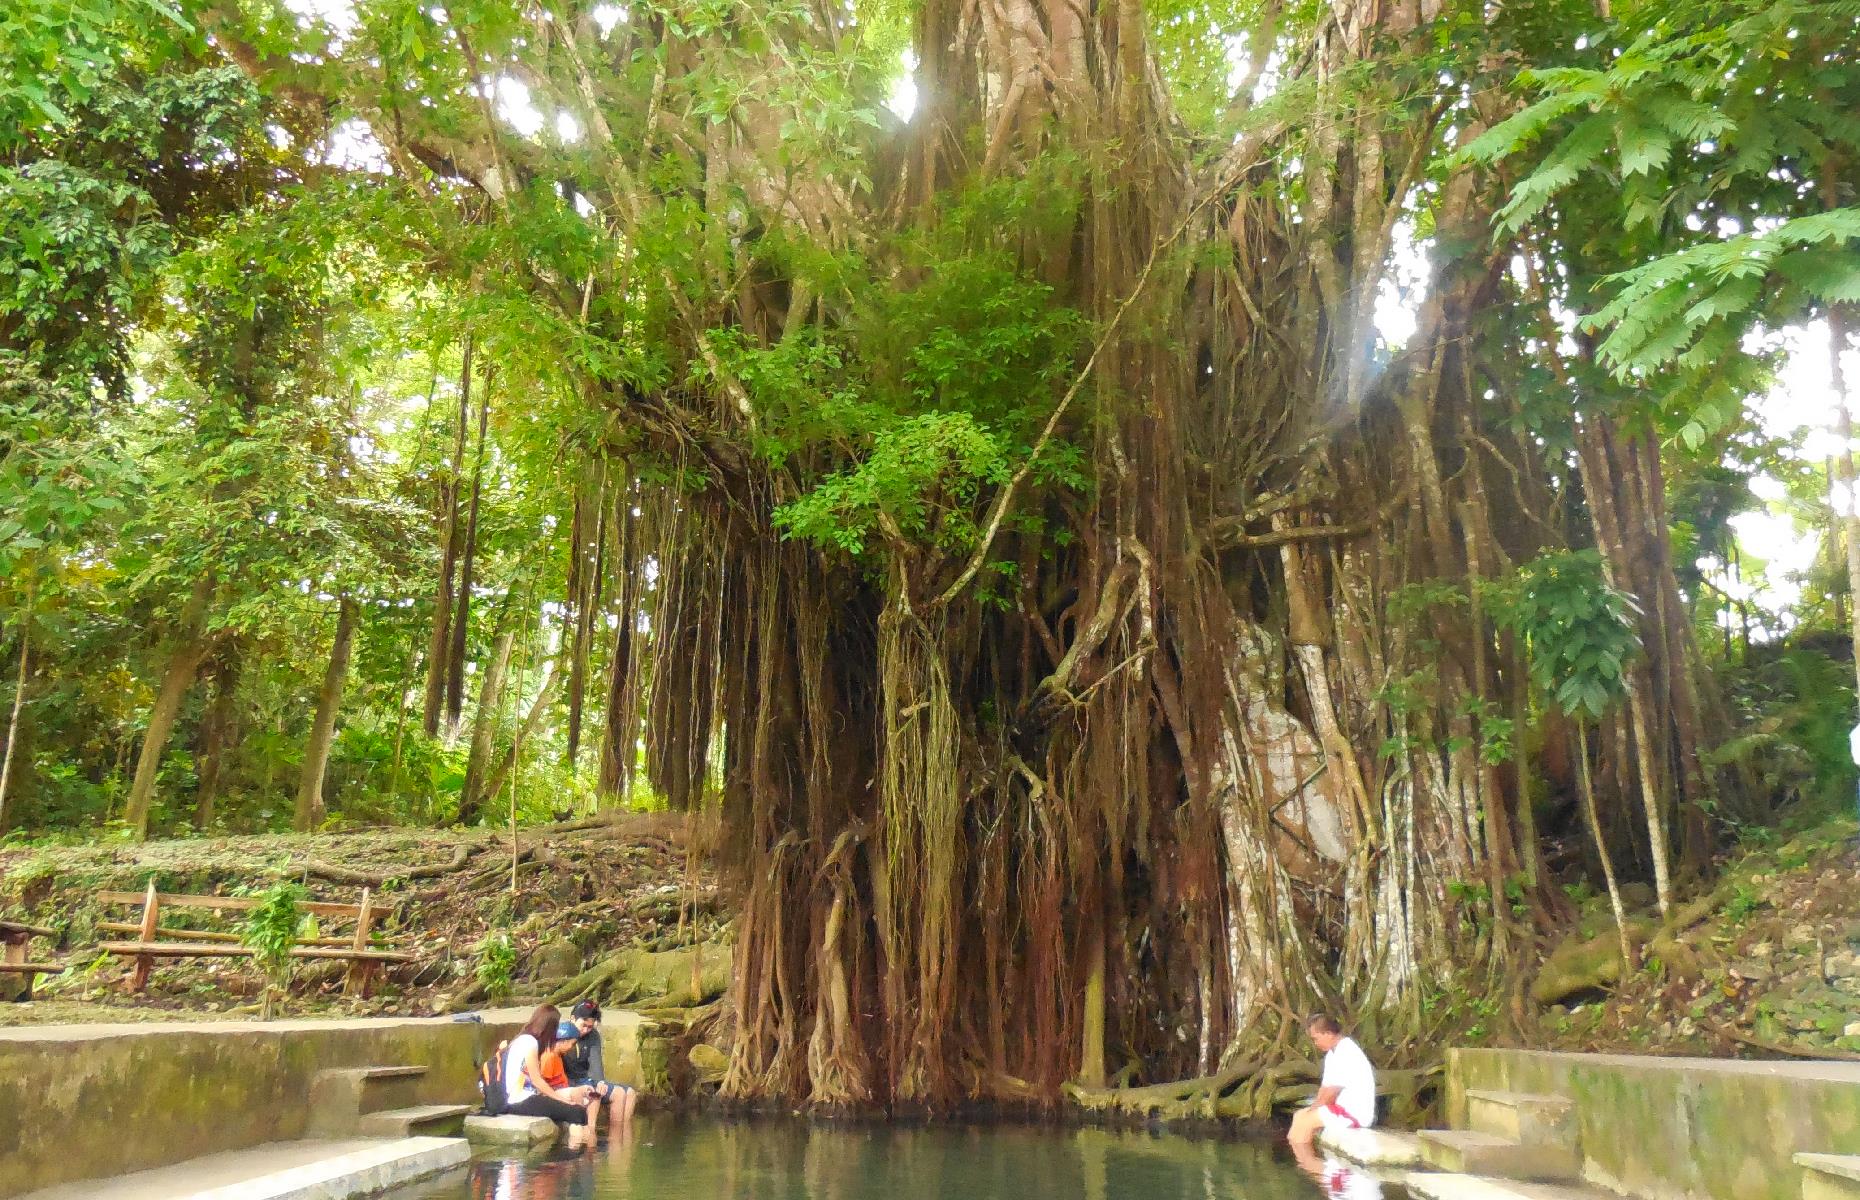 <p>A quite remarkable sight, this 400-year-old balete tree in the Philippines' Siquijor province is believed to be enchanted. The true nature of the tree's magic remains a mystery, but locals tell tales of the mythical creatures which reside here and the sorcery that's performed. Legends aside, tourists and locals come to dip their toes in the natural springs at its base, which are home to schools of feet-nibbling fish. </p>